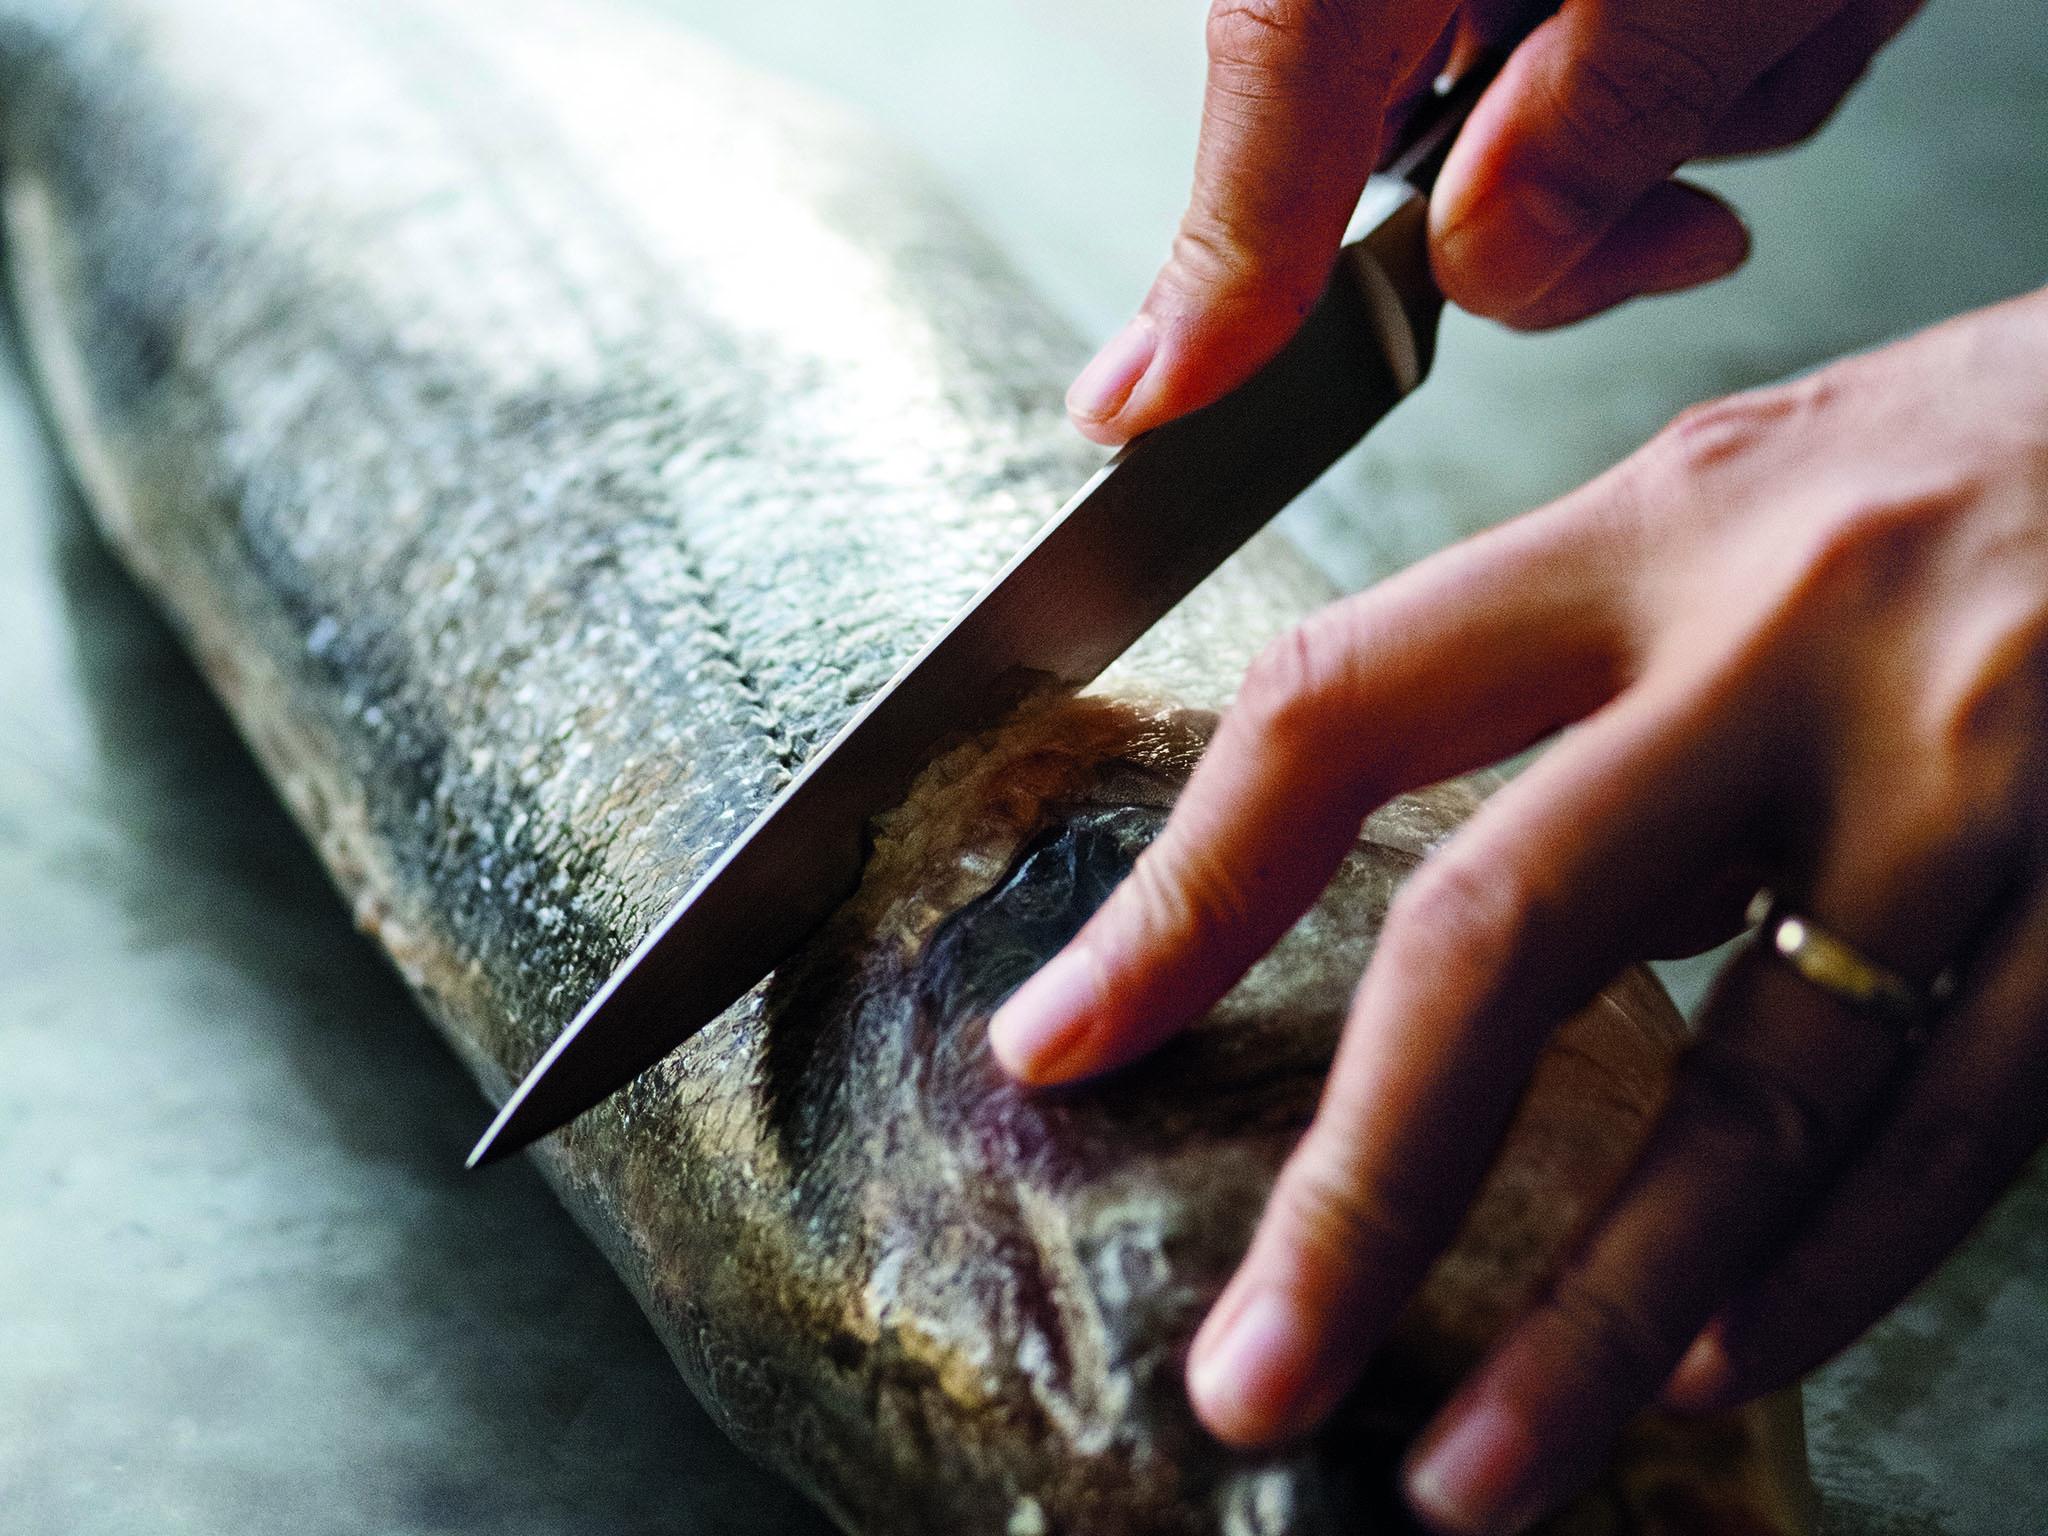 3. Use a sharp filleting knife to cut through the fish just below the gills until you reach the bone